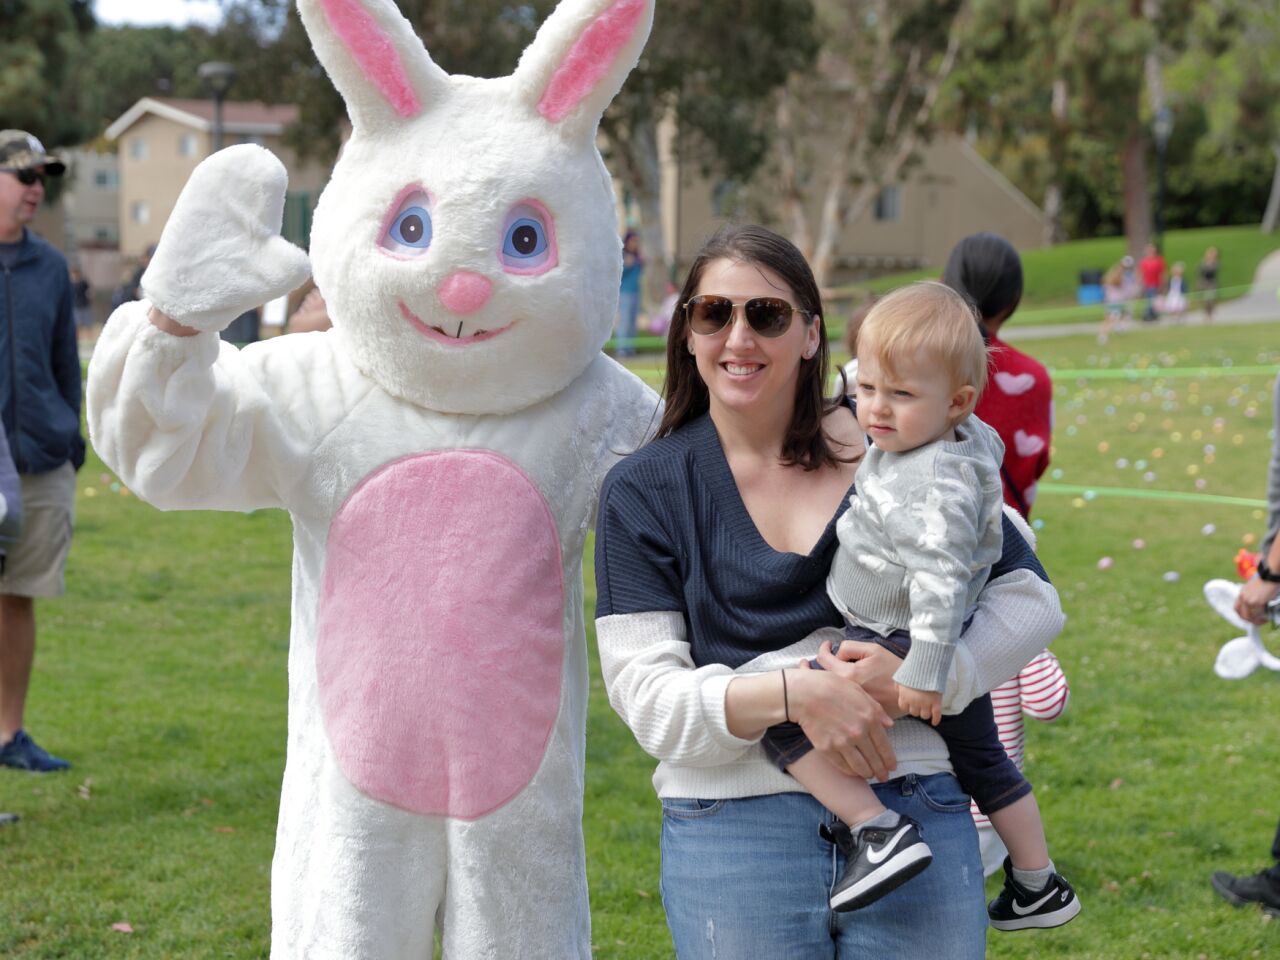 Danielle and Brody Hoban visit the Easter Bunny